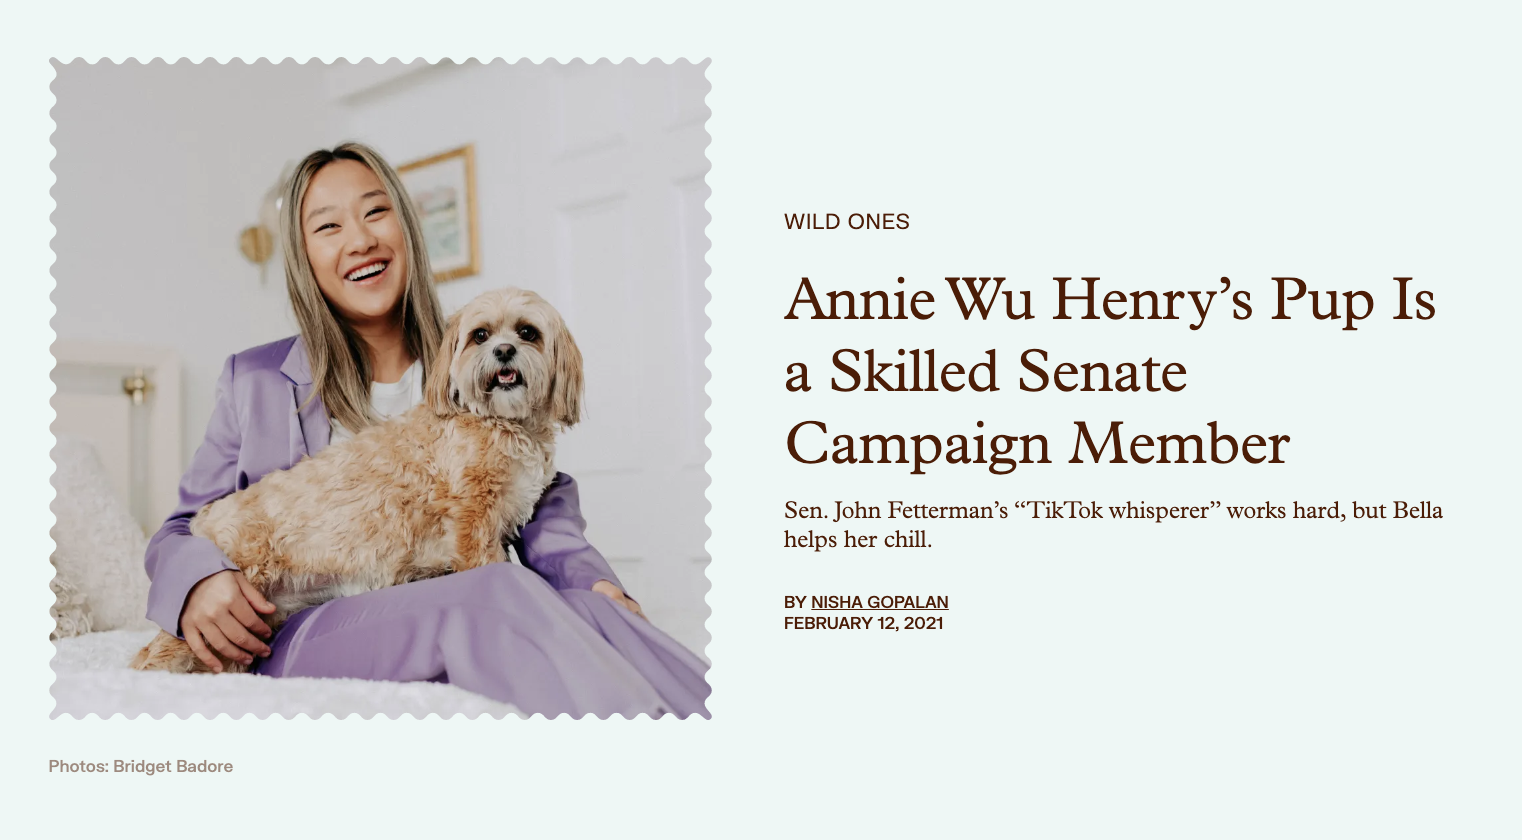 Annie Wu Henry for The Wildest